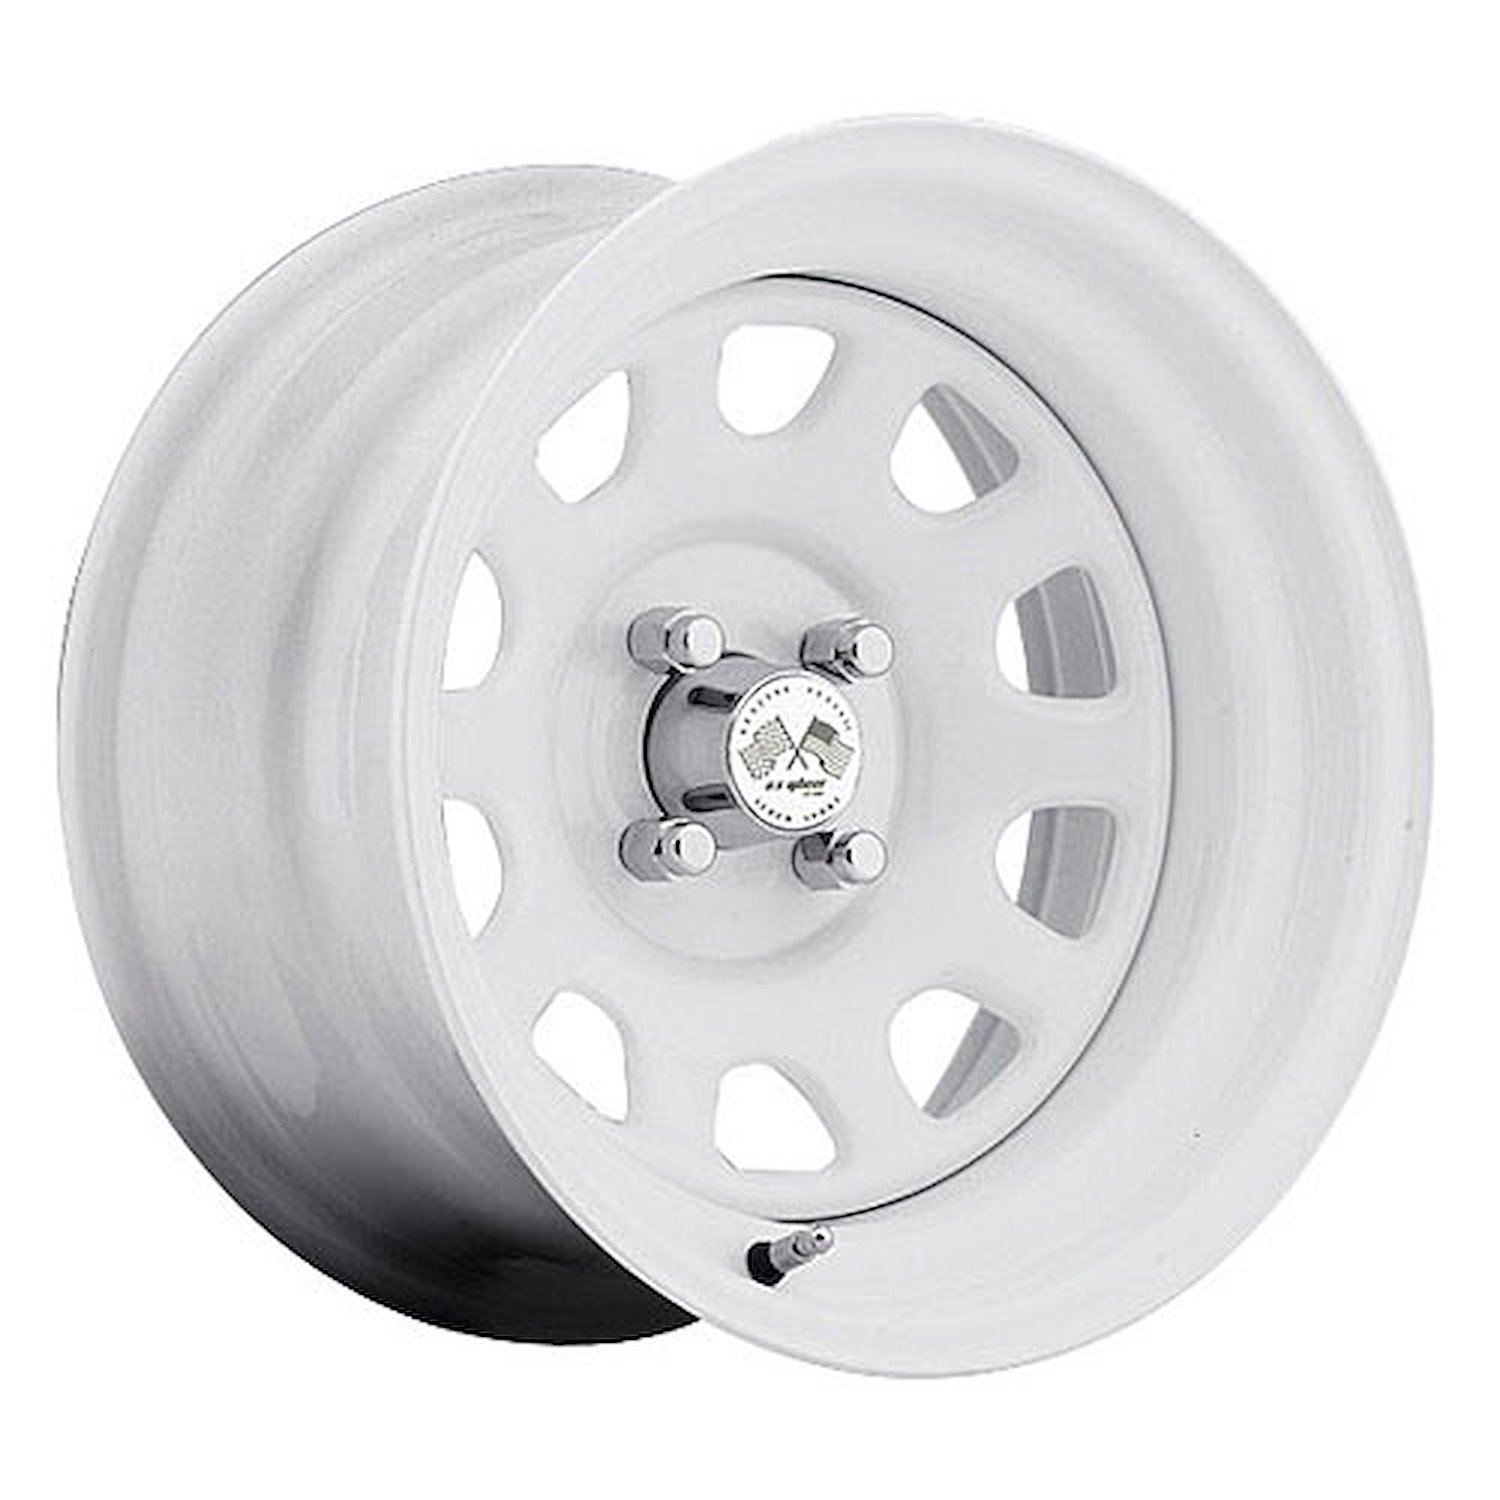 PAINTED DAYTONA FWD DRIFTER WHITE 15 x 8 4 x 45 Bolt Circle 45 Back Spacing 0 offset 266 Center Bore 1400 lbs Load Rating